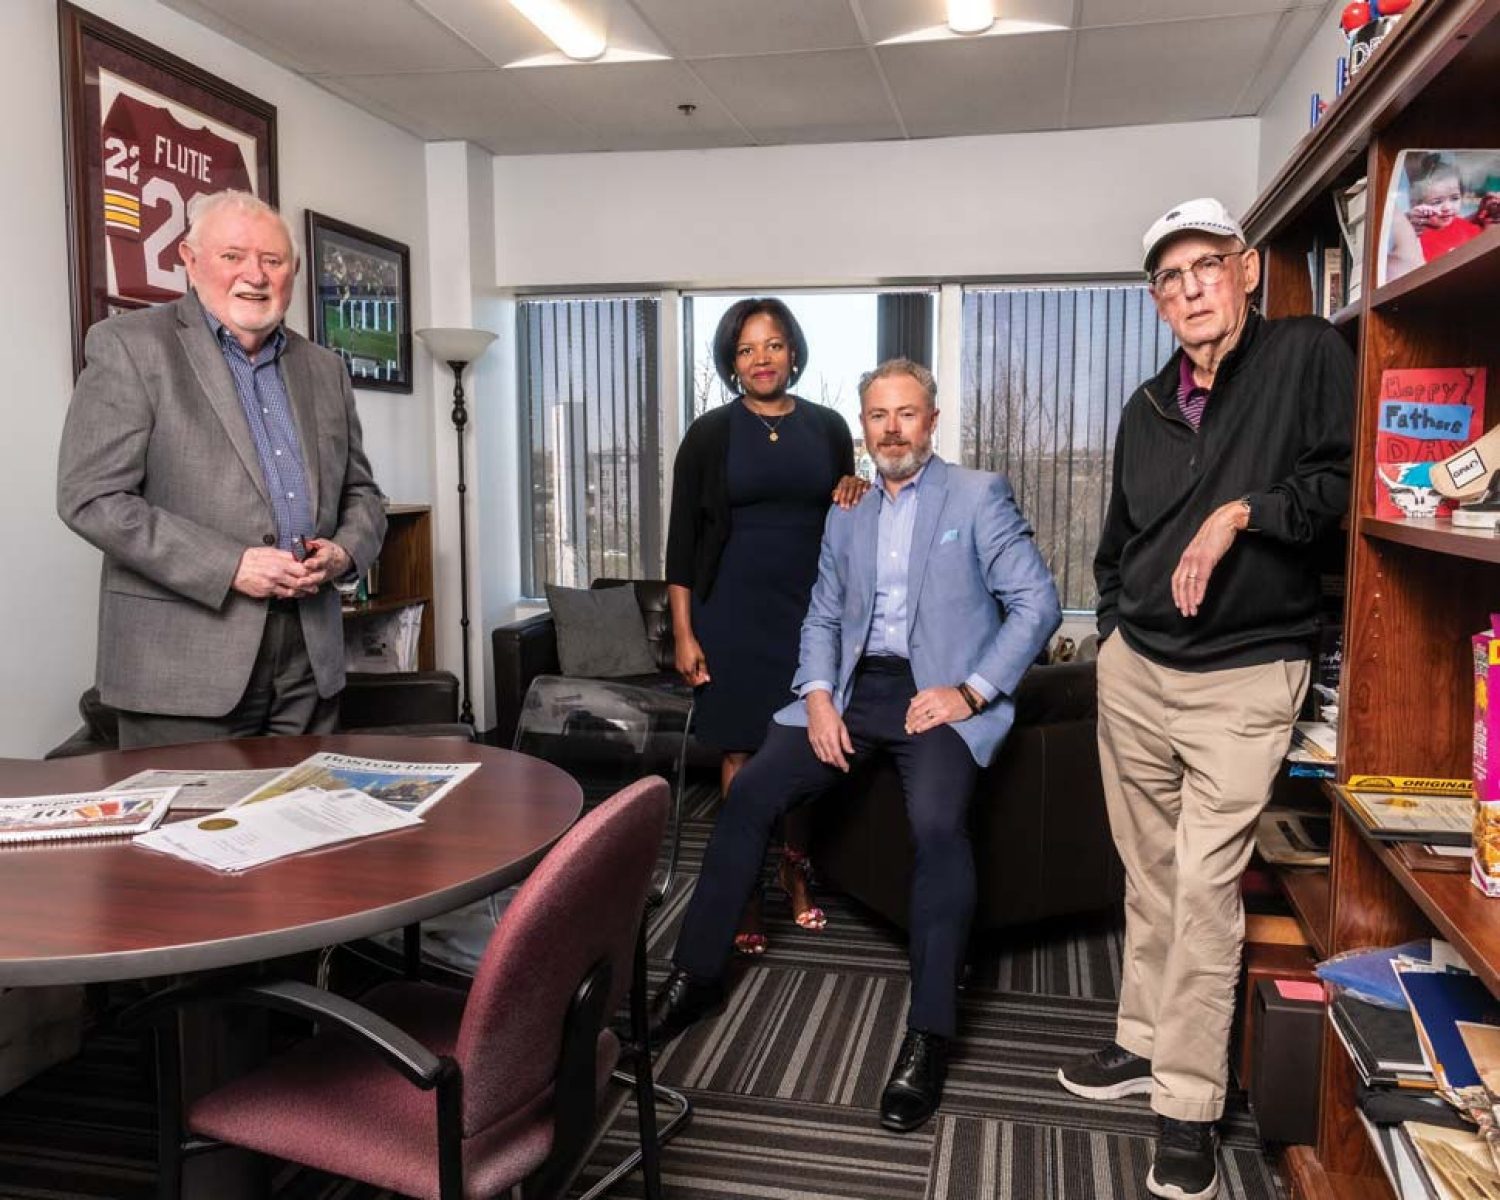 Dorchester Reporter founder Ed Forry ’69, copublisher Linda Dorcena Forry ’96, executive editor Bill Forry ’95, and associate editor Tom Mulvoy ’64 photographed in Bill Forry's office.